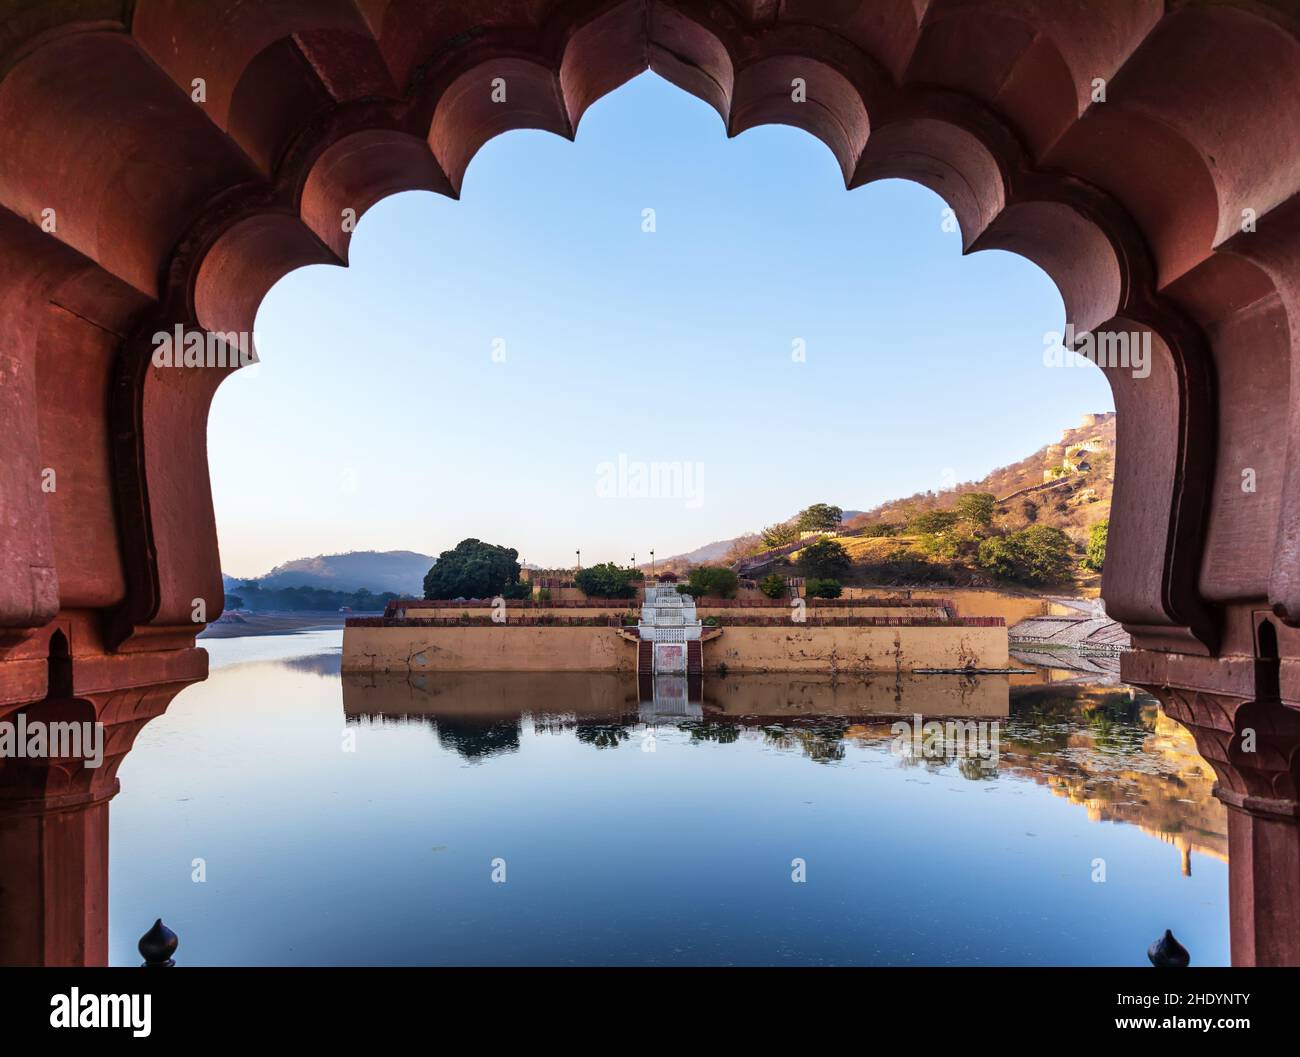 Amber Fort, amer, Amber Forts Stockfoto